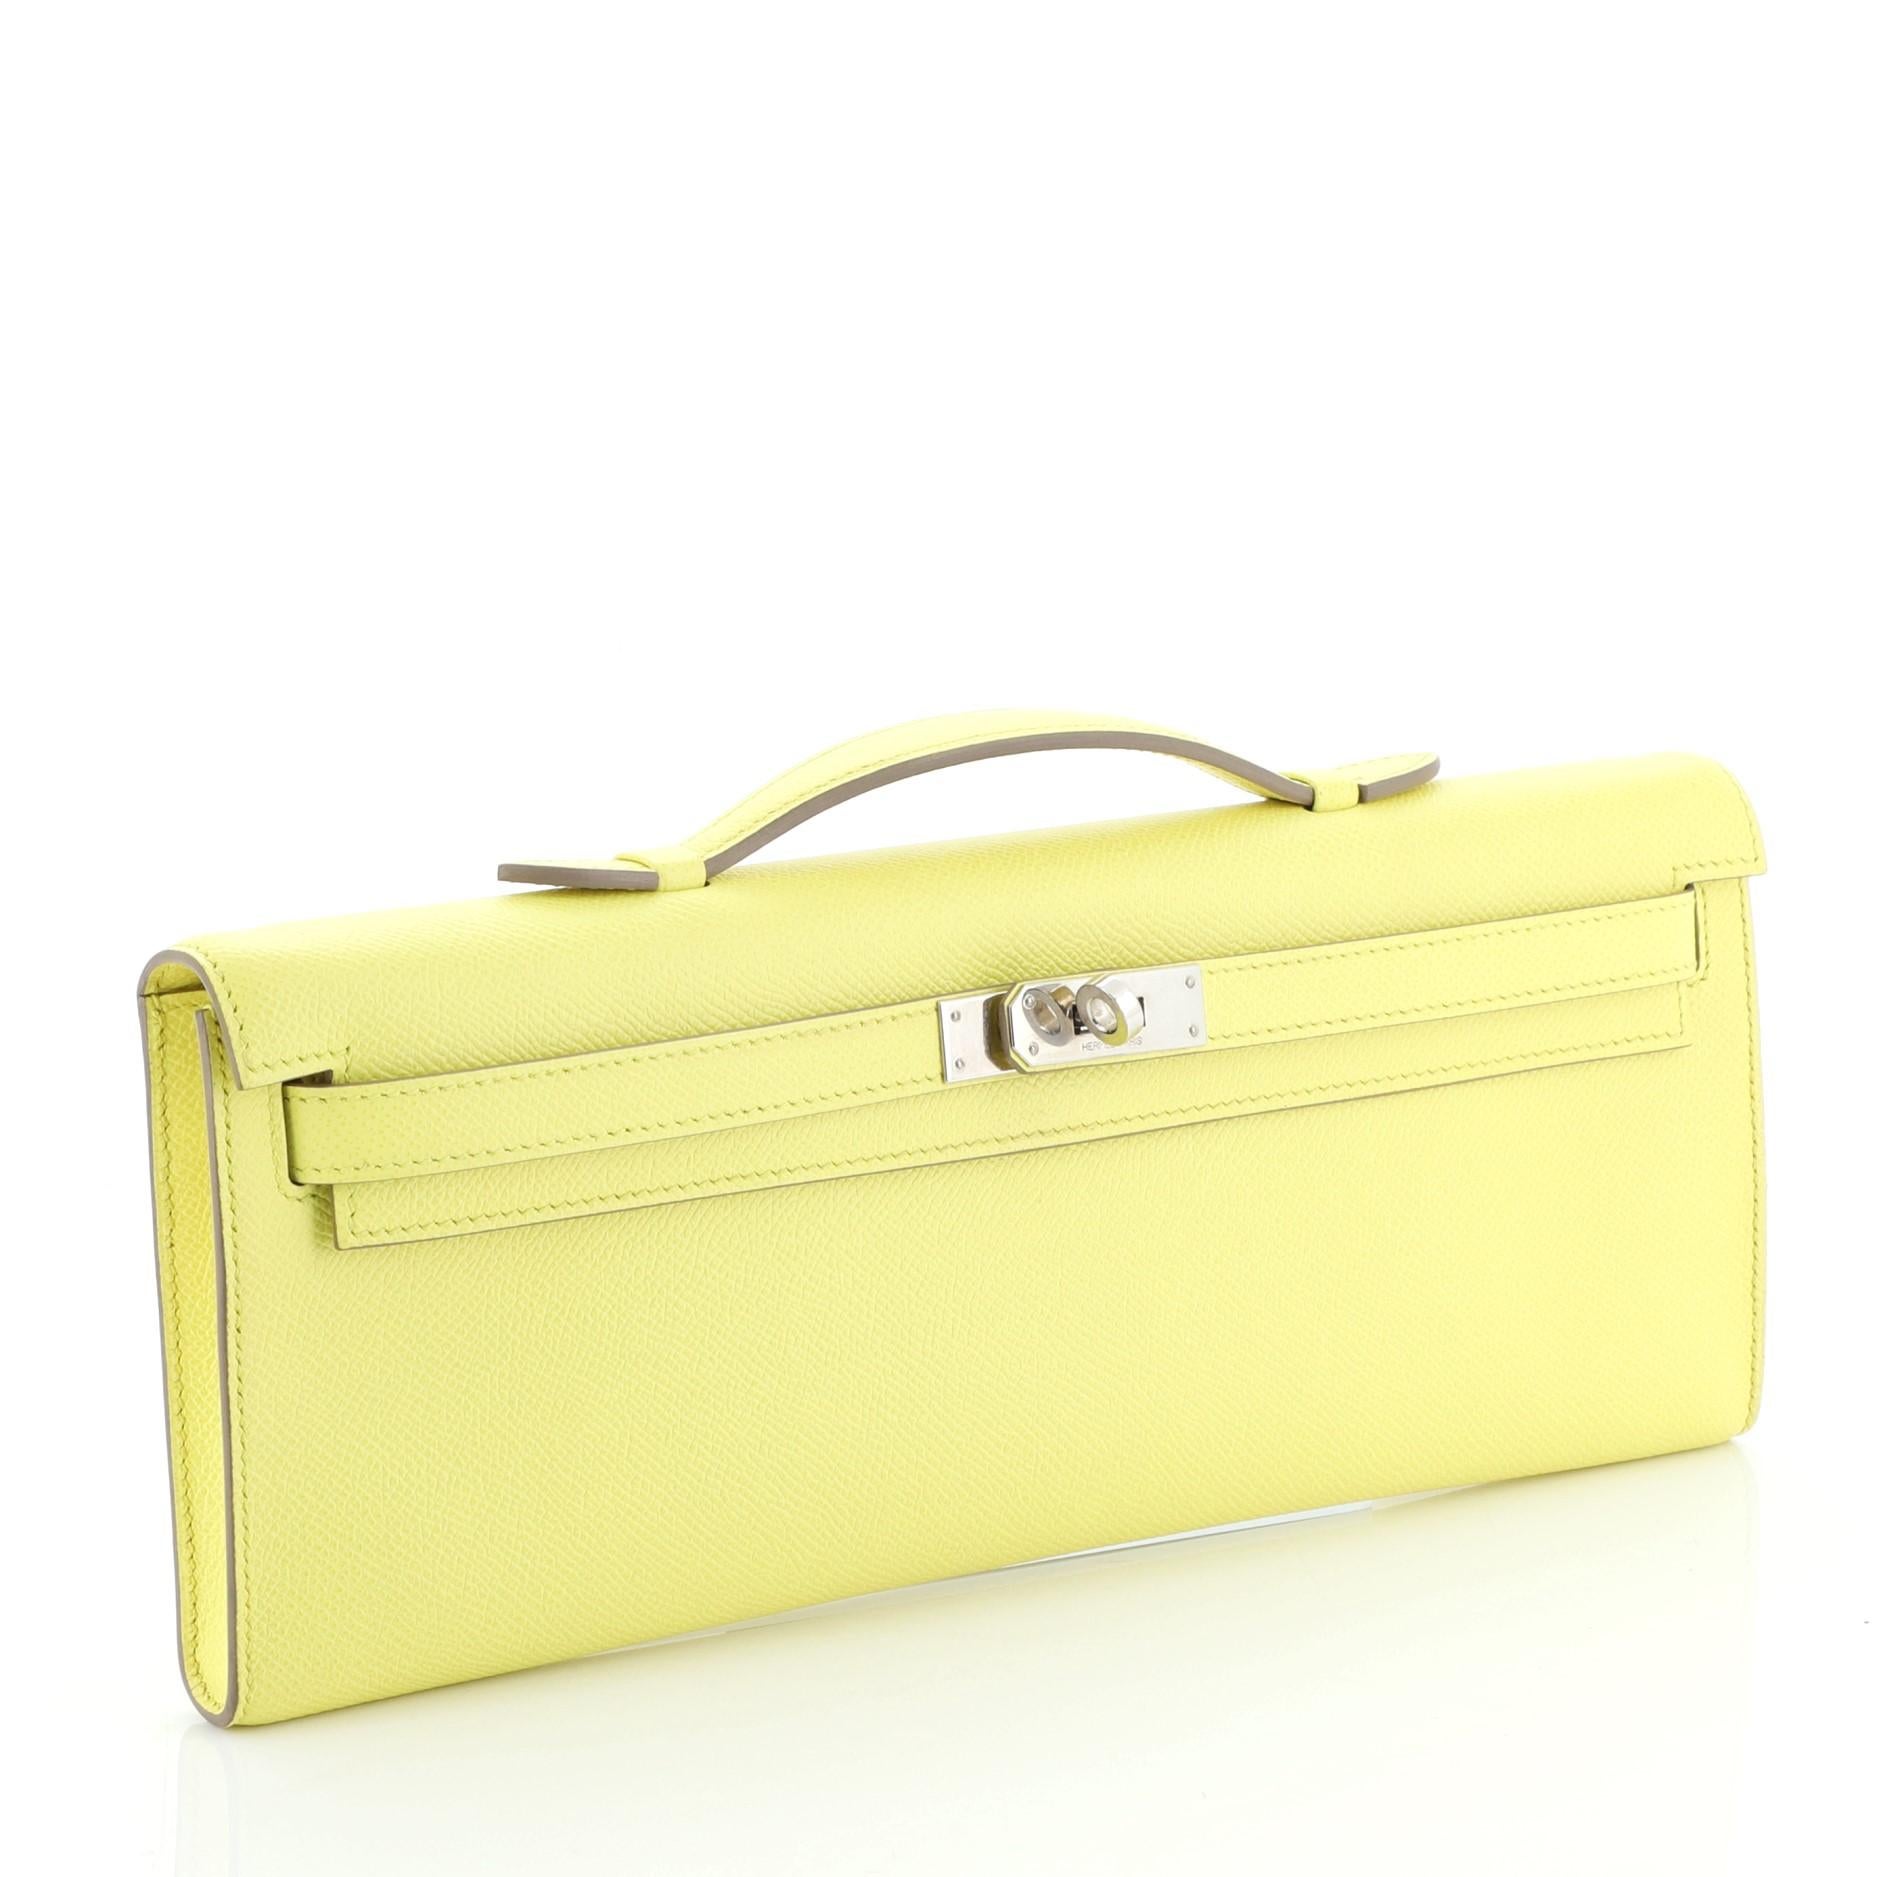 This Hermes Kelly Cut Pochette Epsom, crafted in Soufre yellow Epsom leather, features a frontal flap, top handle, and palladium hardware. Its turn-lock closure opens to a Soufre yellow Chevre leather interior. Date stamp reads: Q Square (2013).